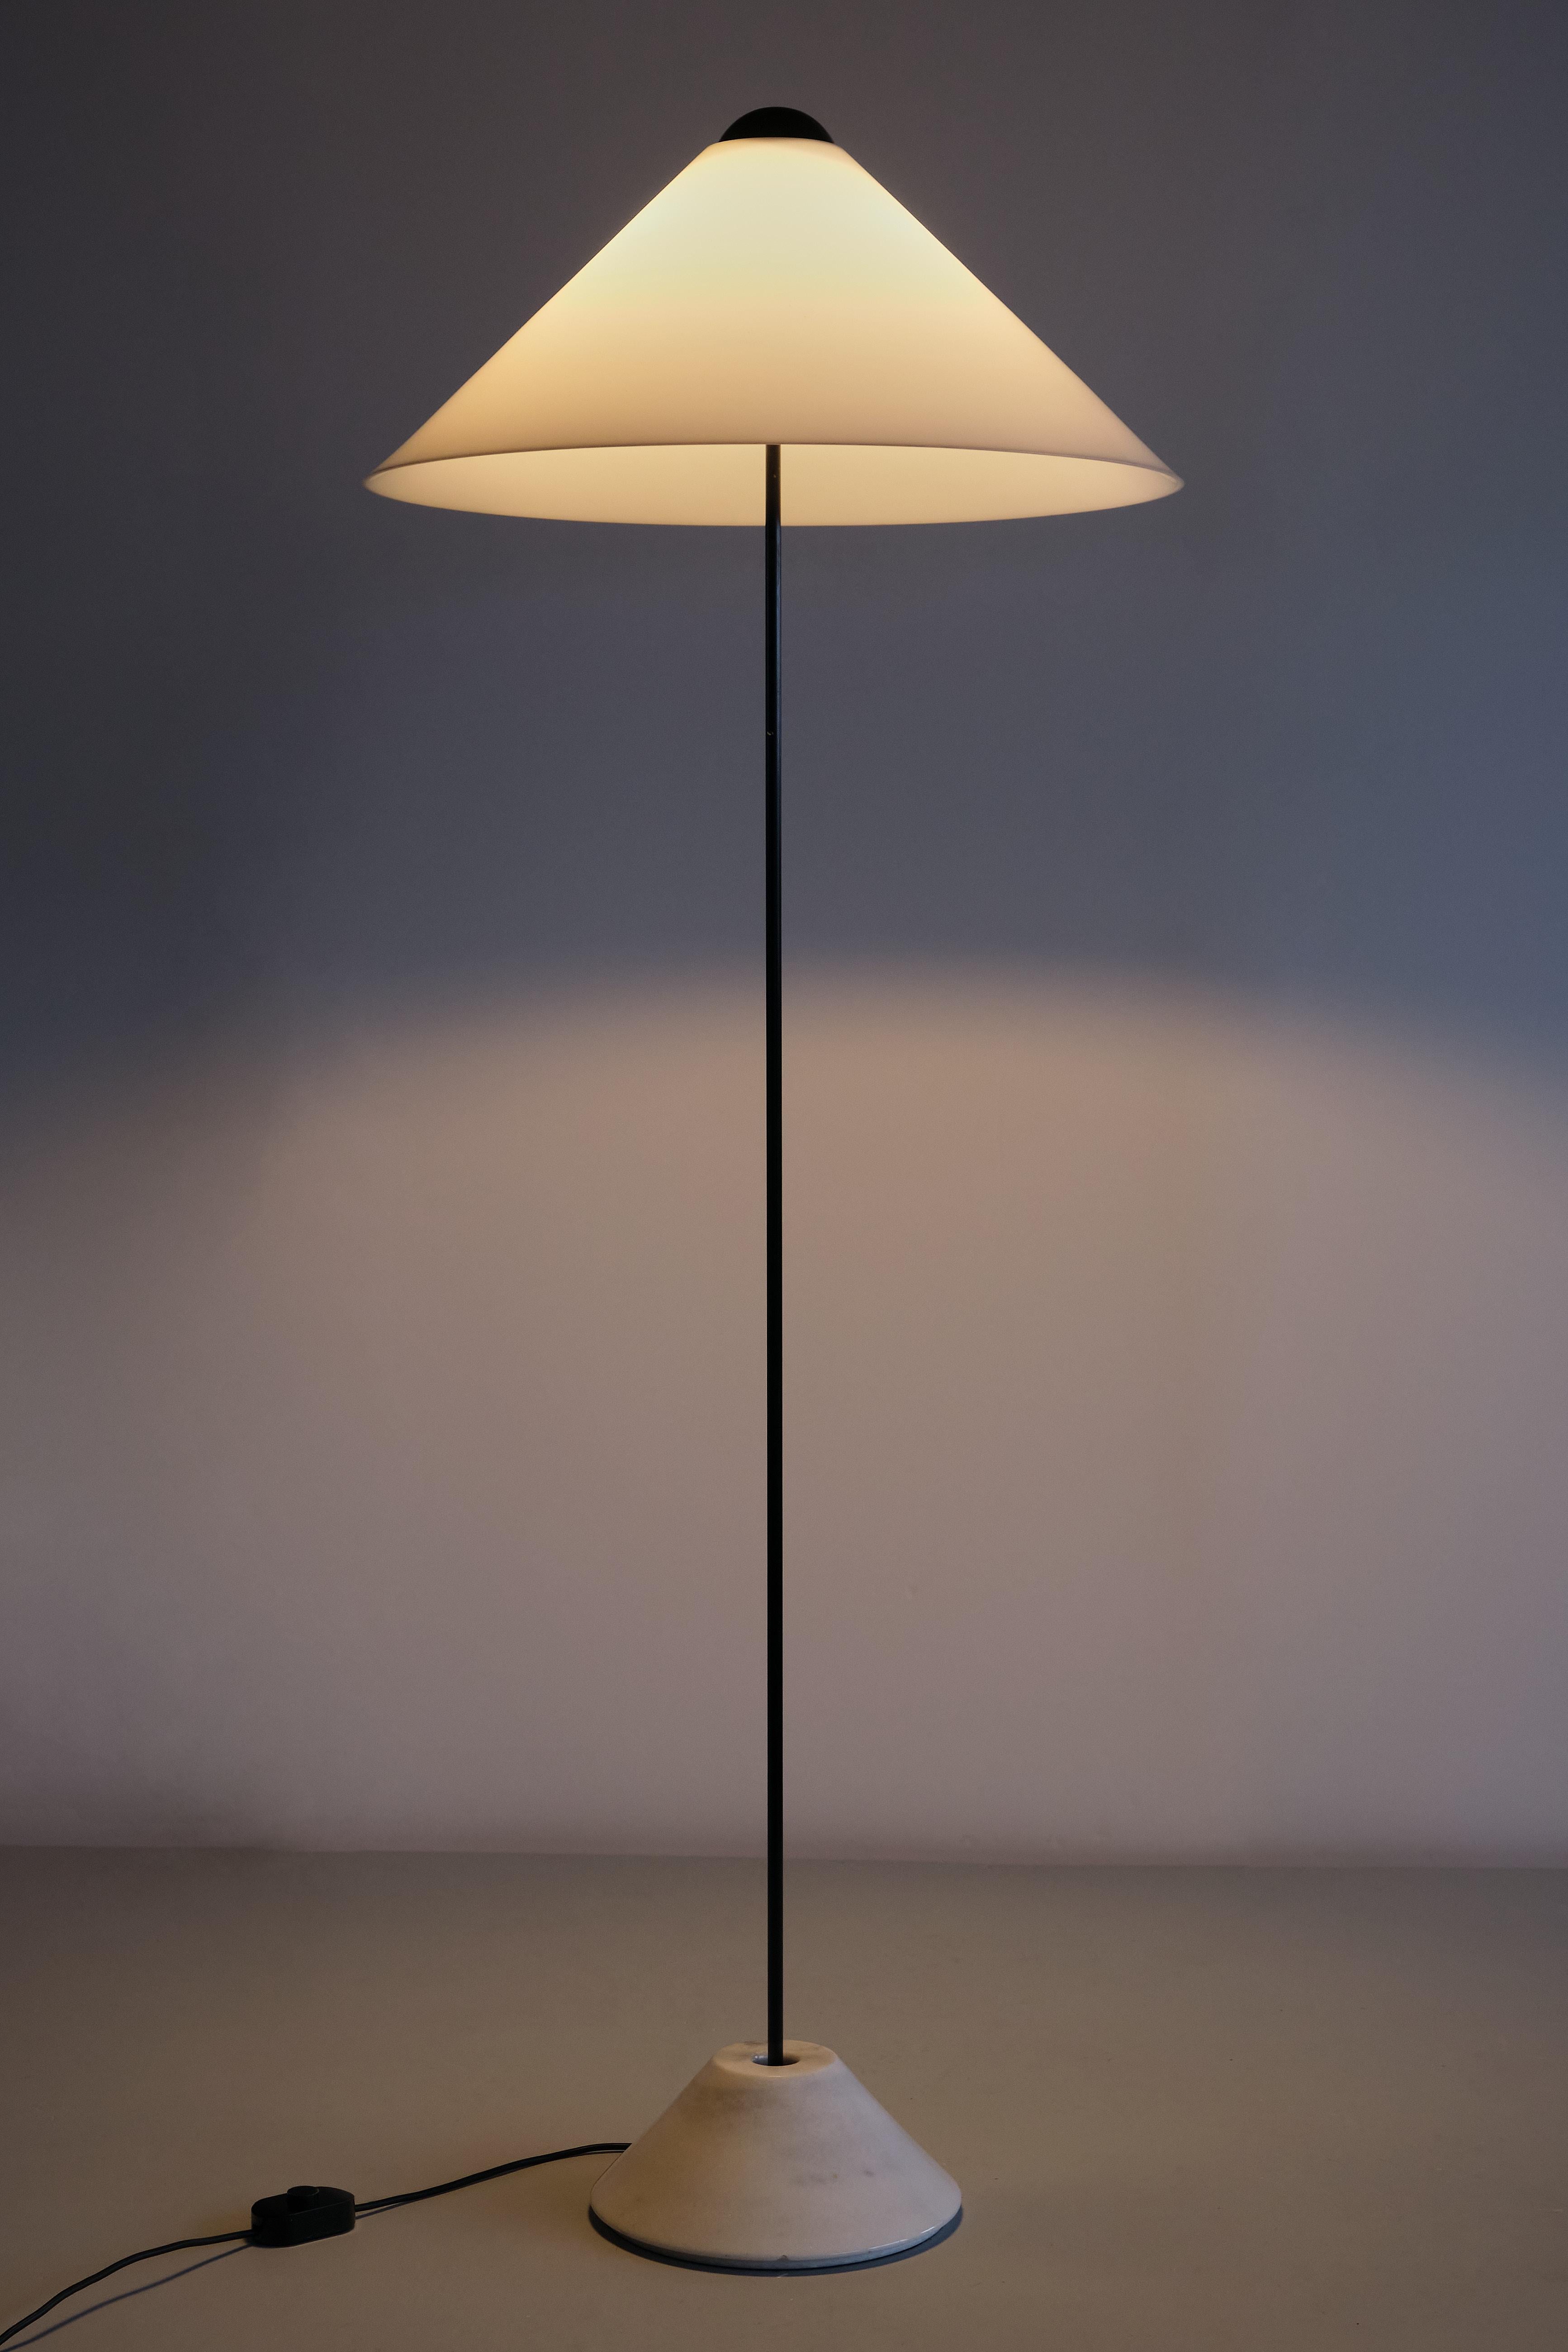 Steel Vico Magistretti 'Snow' Floor Lamp in Metal and Marble, Oluce, Italy, 1973